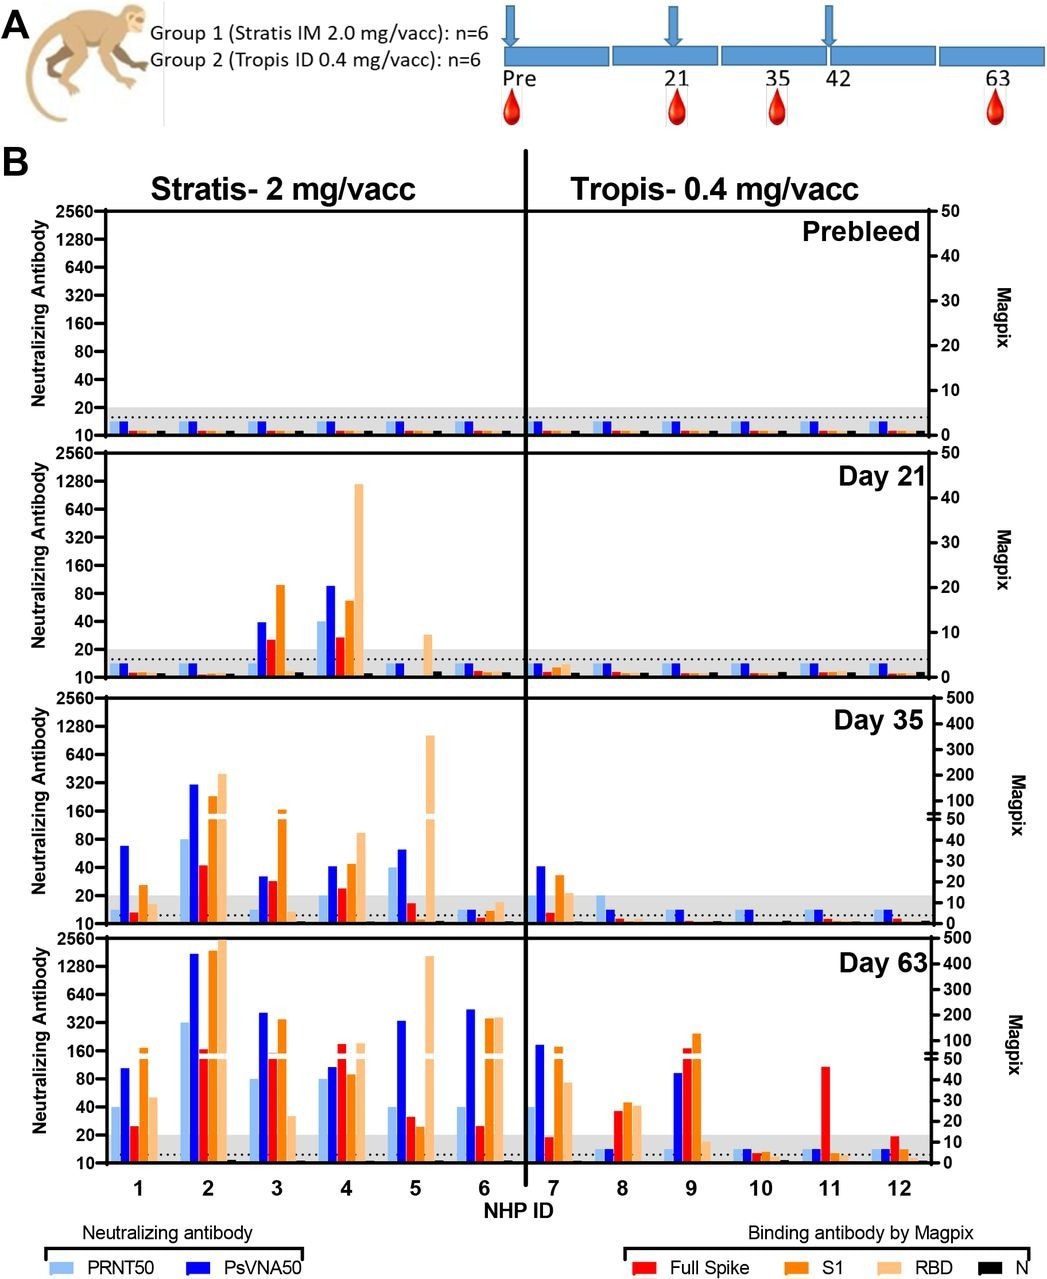 Neutralizing and binding antibody responses.  PRNT50, PsVNA50, and Magpix titers from sera collected at various time points.  A) Design.  (blue arrows = vaccine dosing; red drops = blood collection time points).  B) Neutralizing and binding antibody values ​​at the indicated time points.  Assay lower limits are shown as gray shaded area.